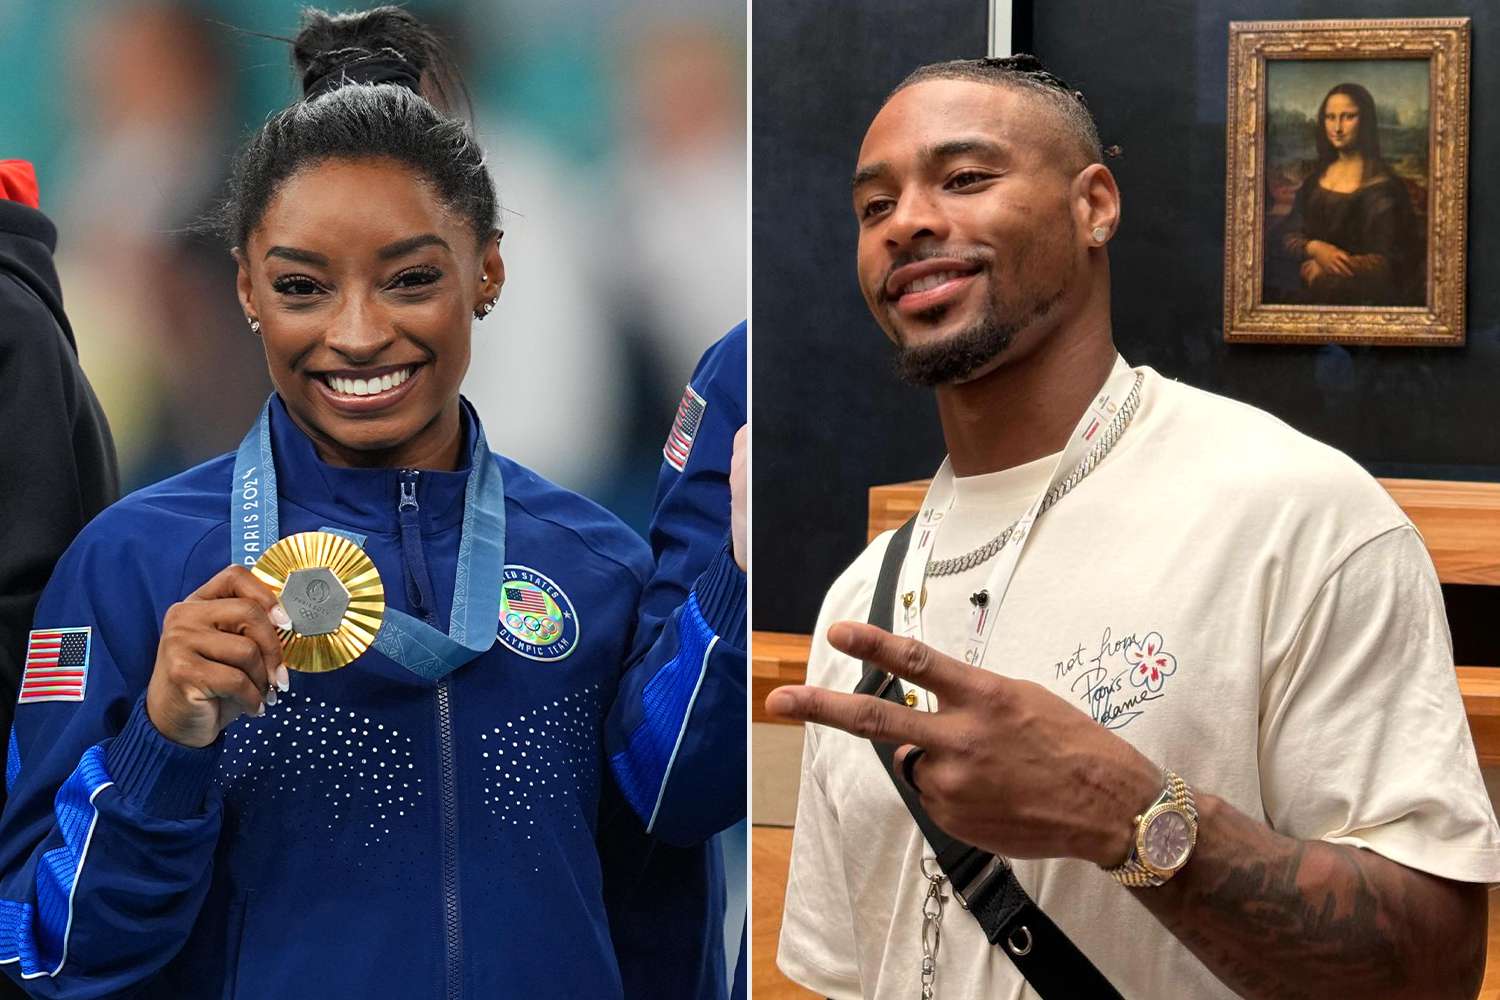 Jonathan Owens Shares Cute Photo of Wife Simone Biles Photoshopped into the Louvre After History-Making Gold Medal